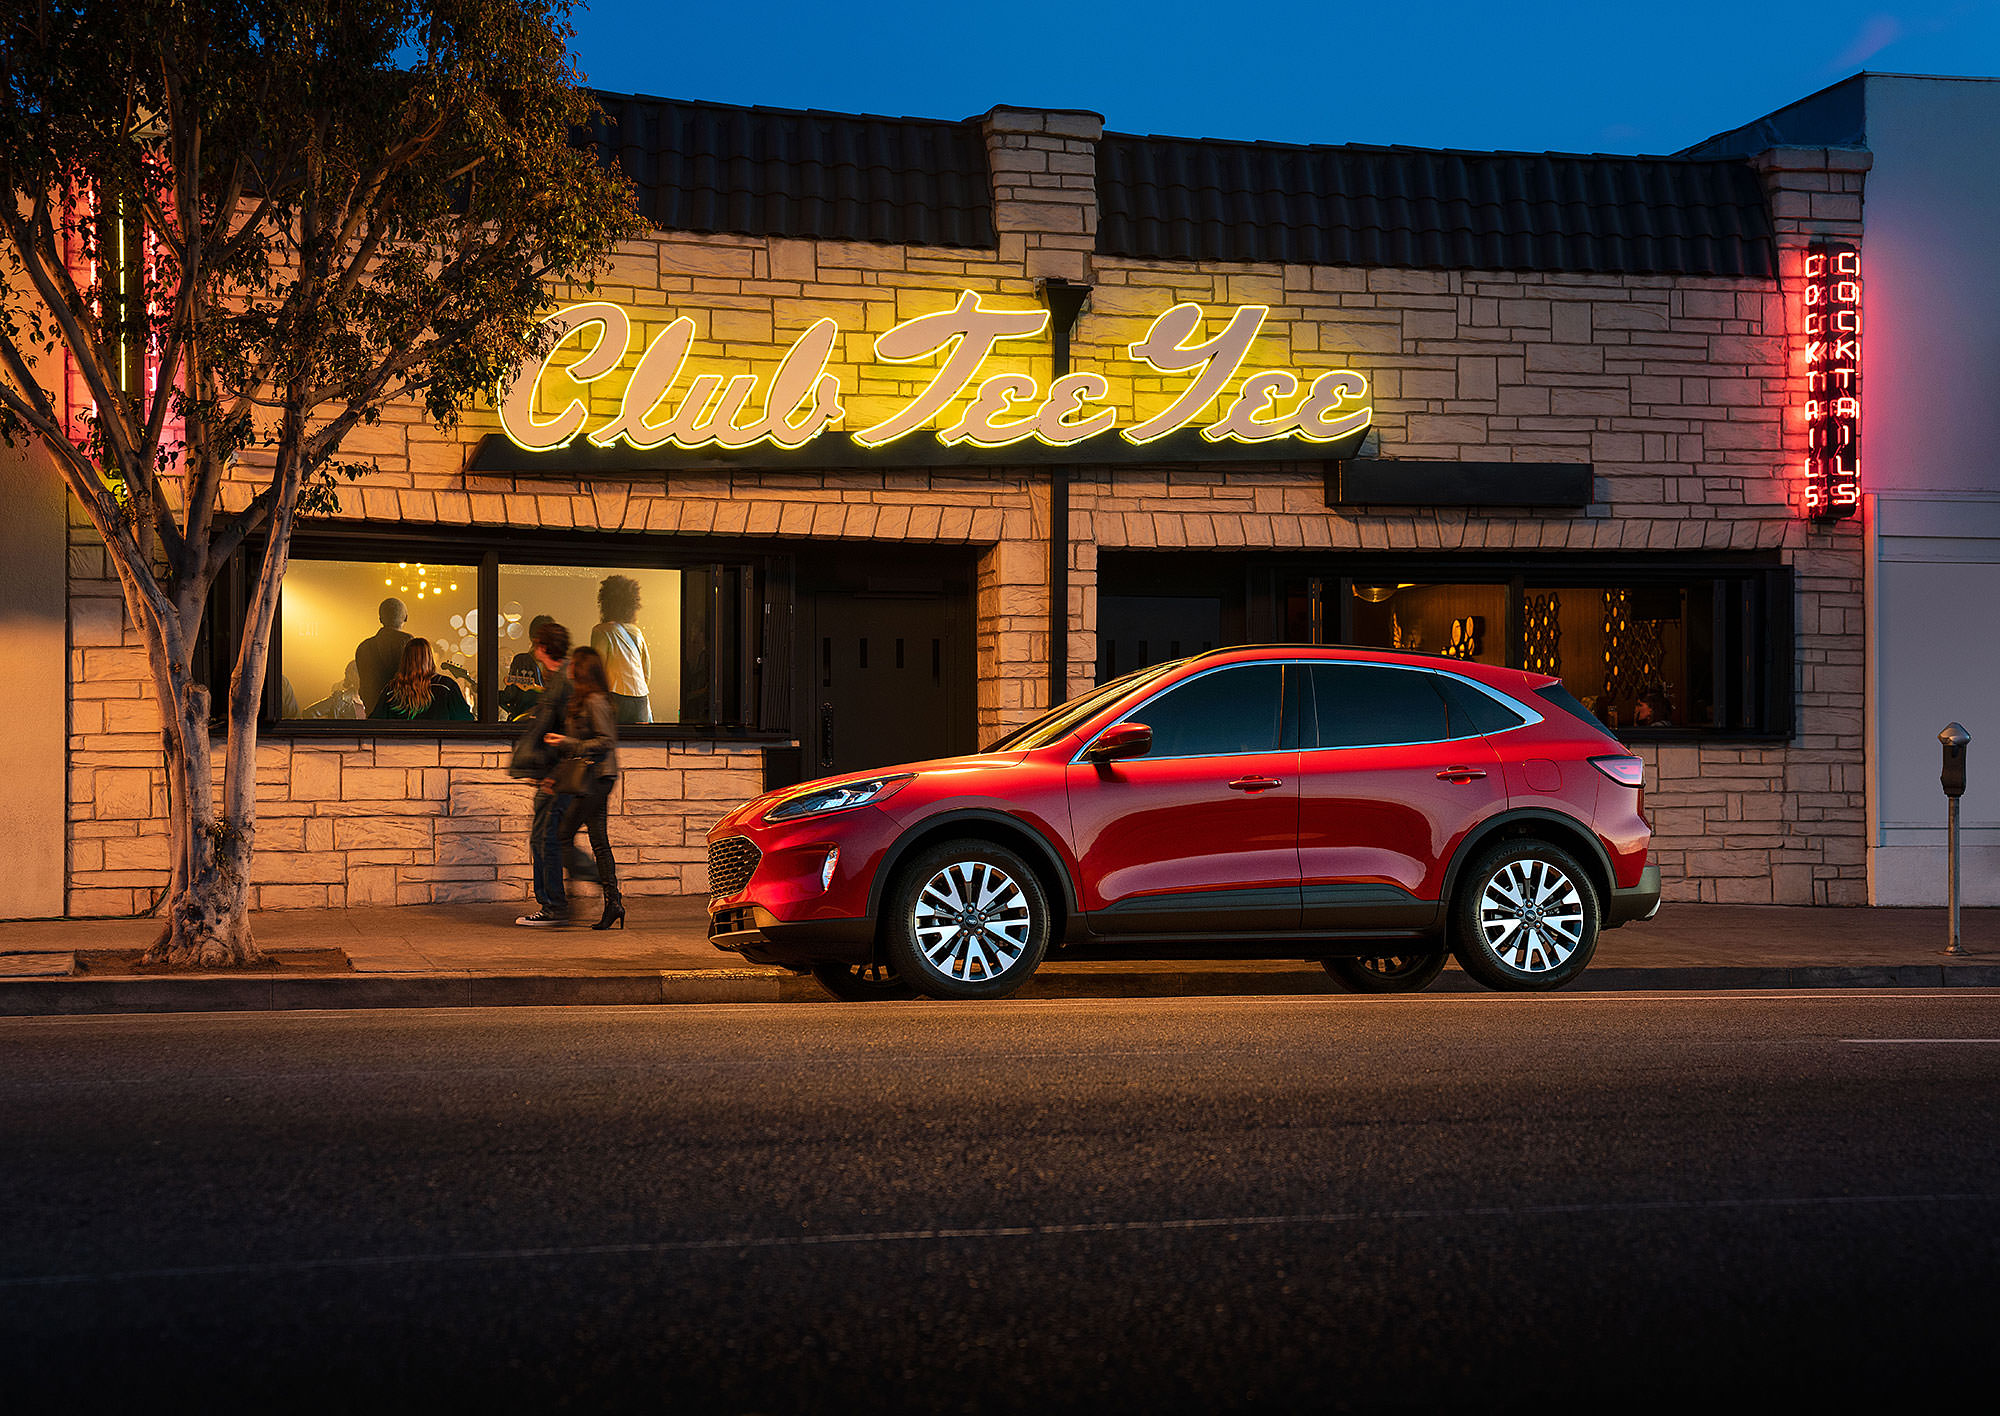 2020 Ford Escape commercial photography in Los Angeles, CA